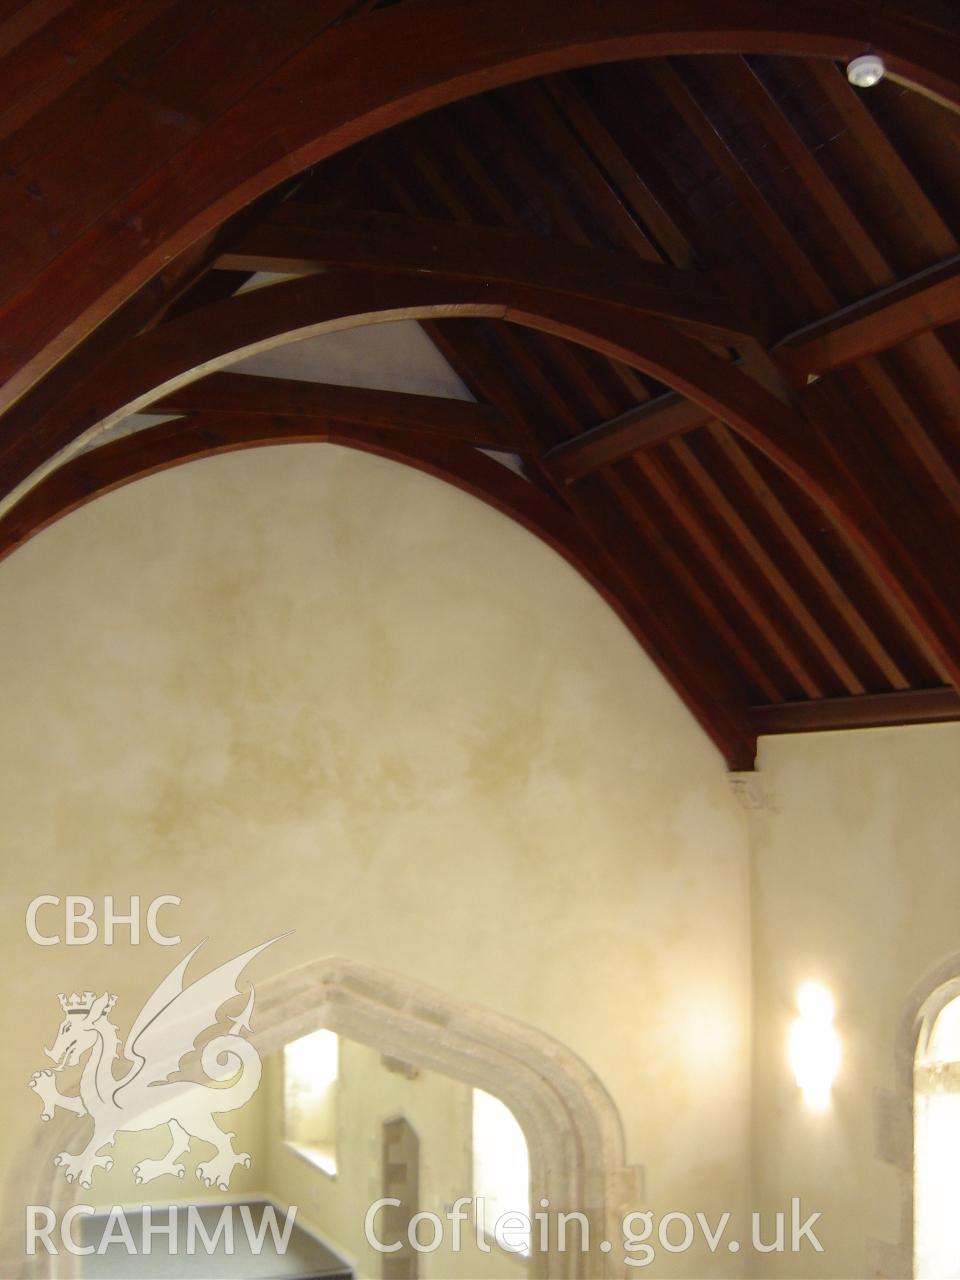 Interior view at Tythegston Church, taken by Care Design, April 2010.